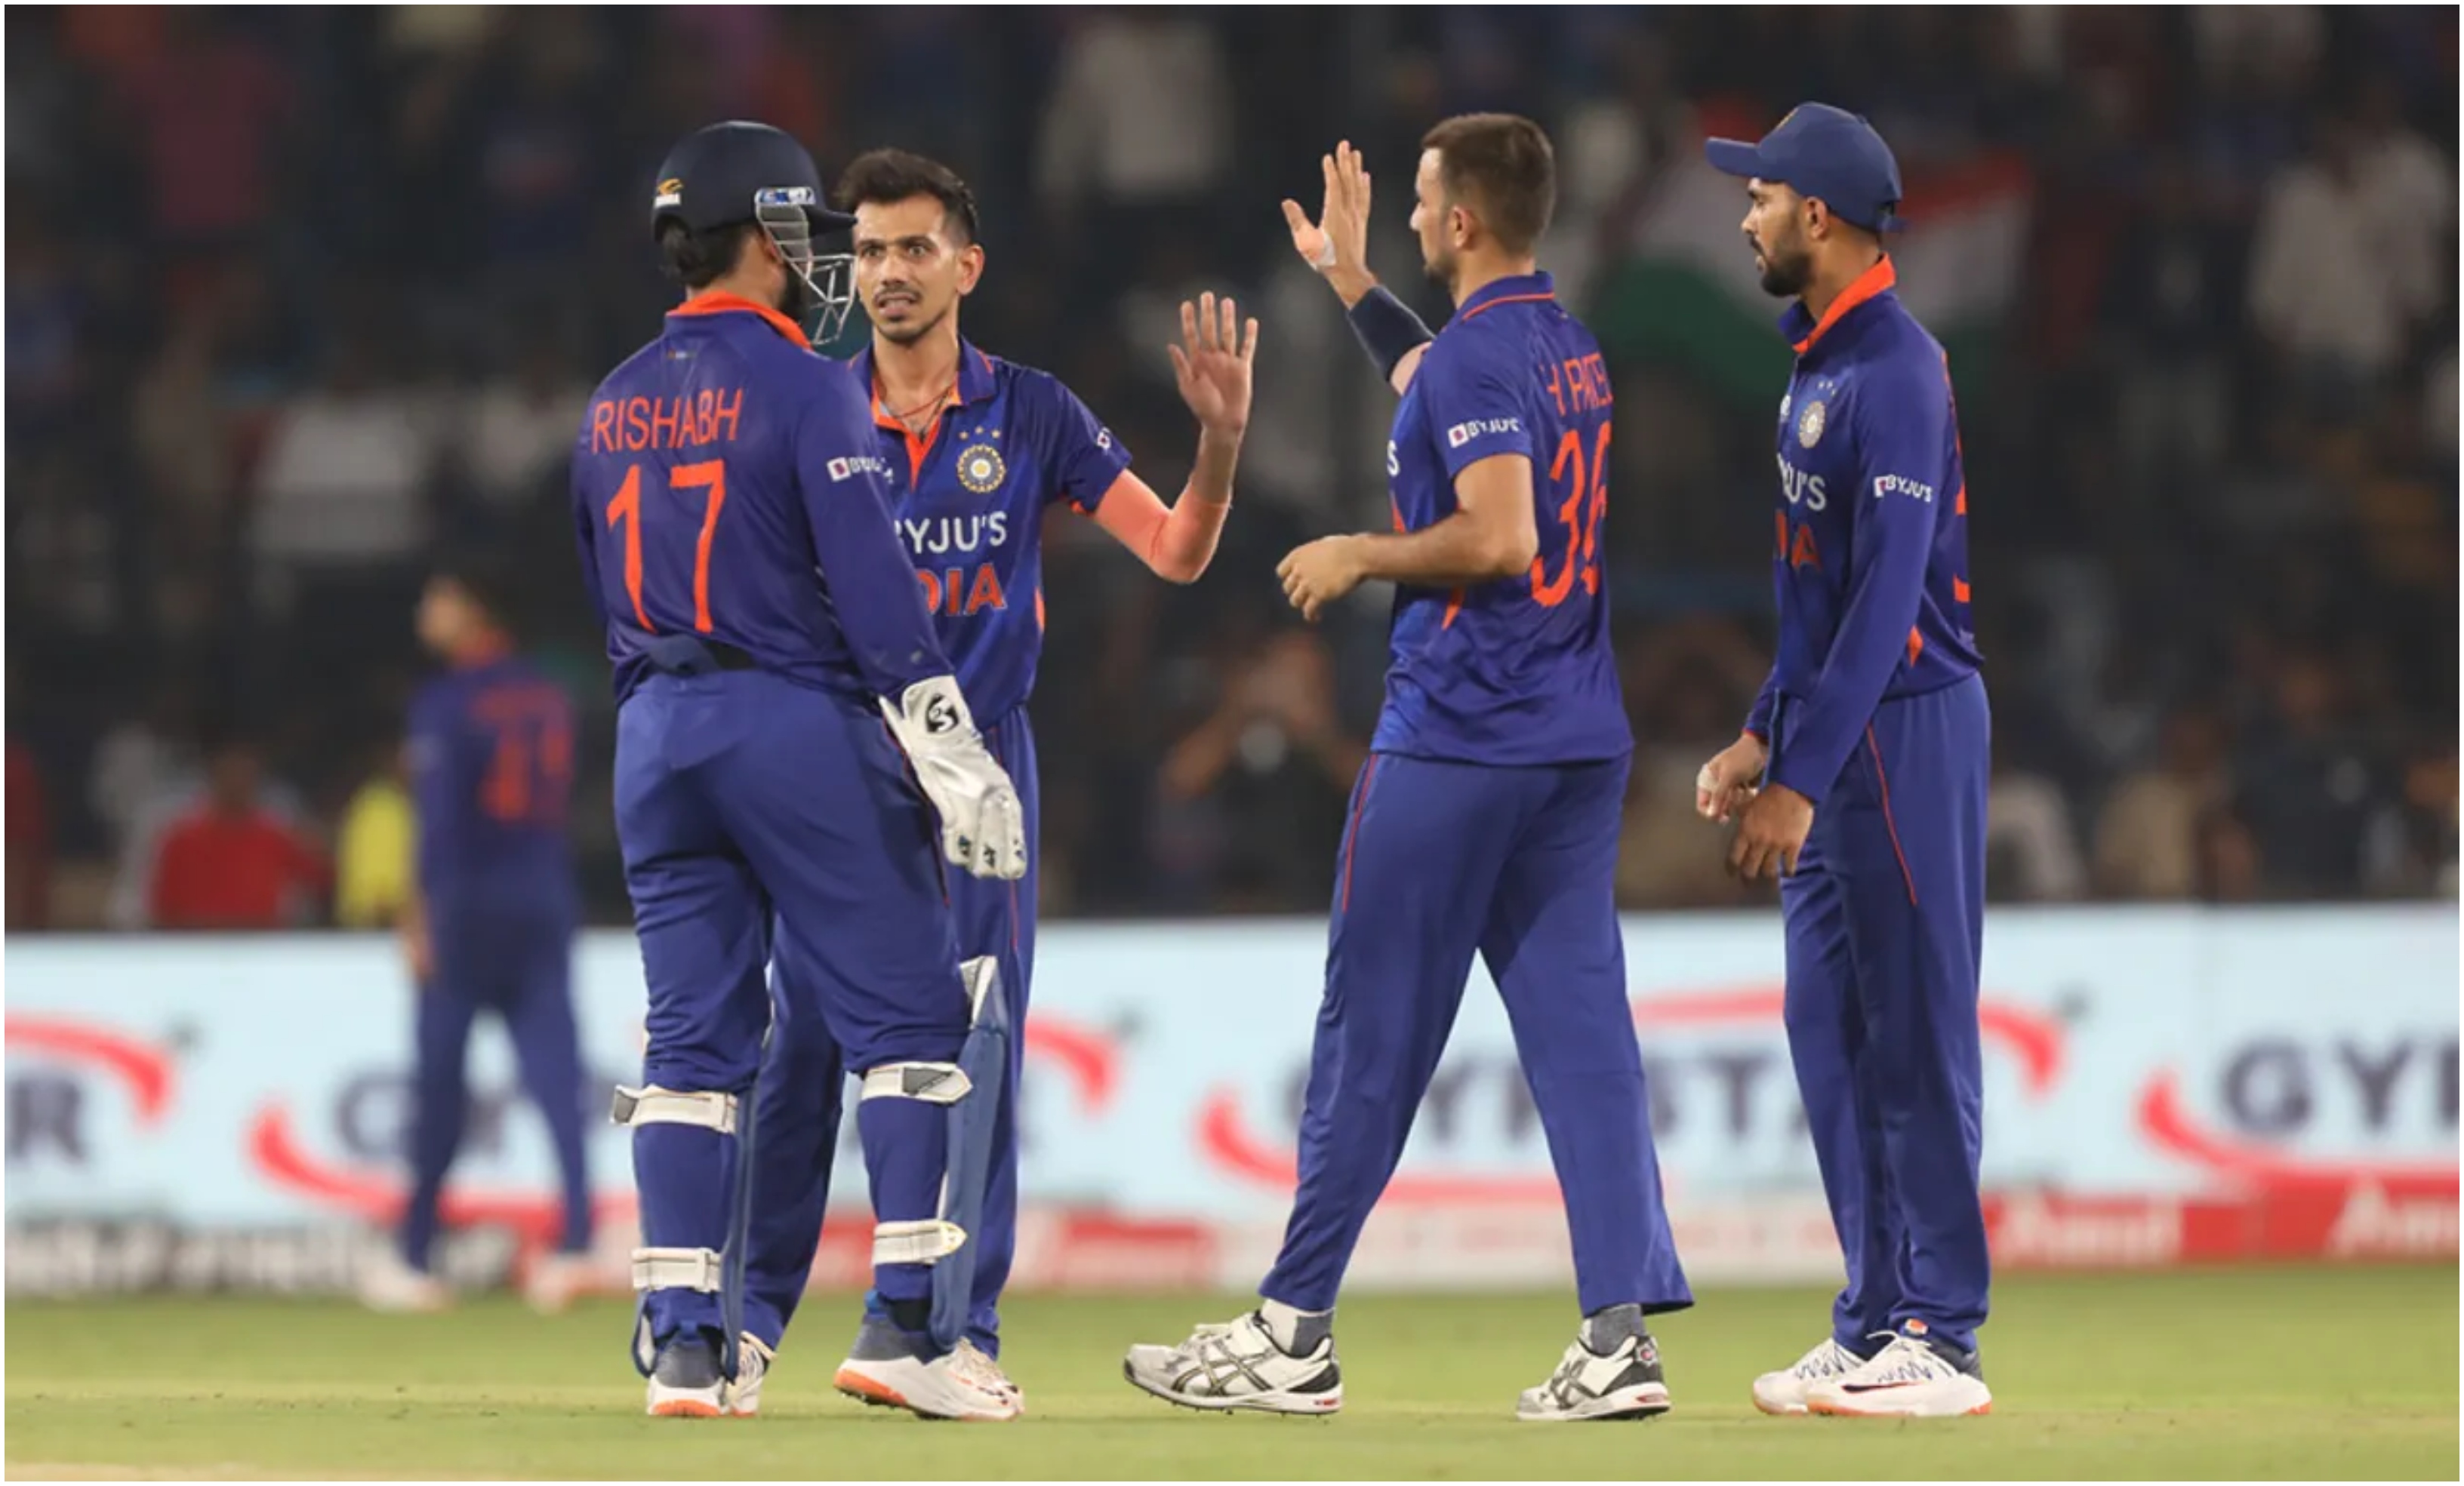 Team India were outplayed in second T20I | BCCI